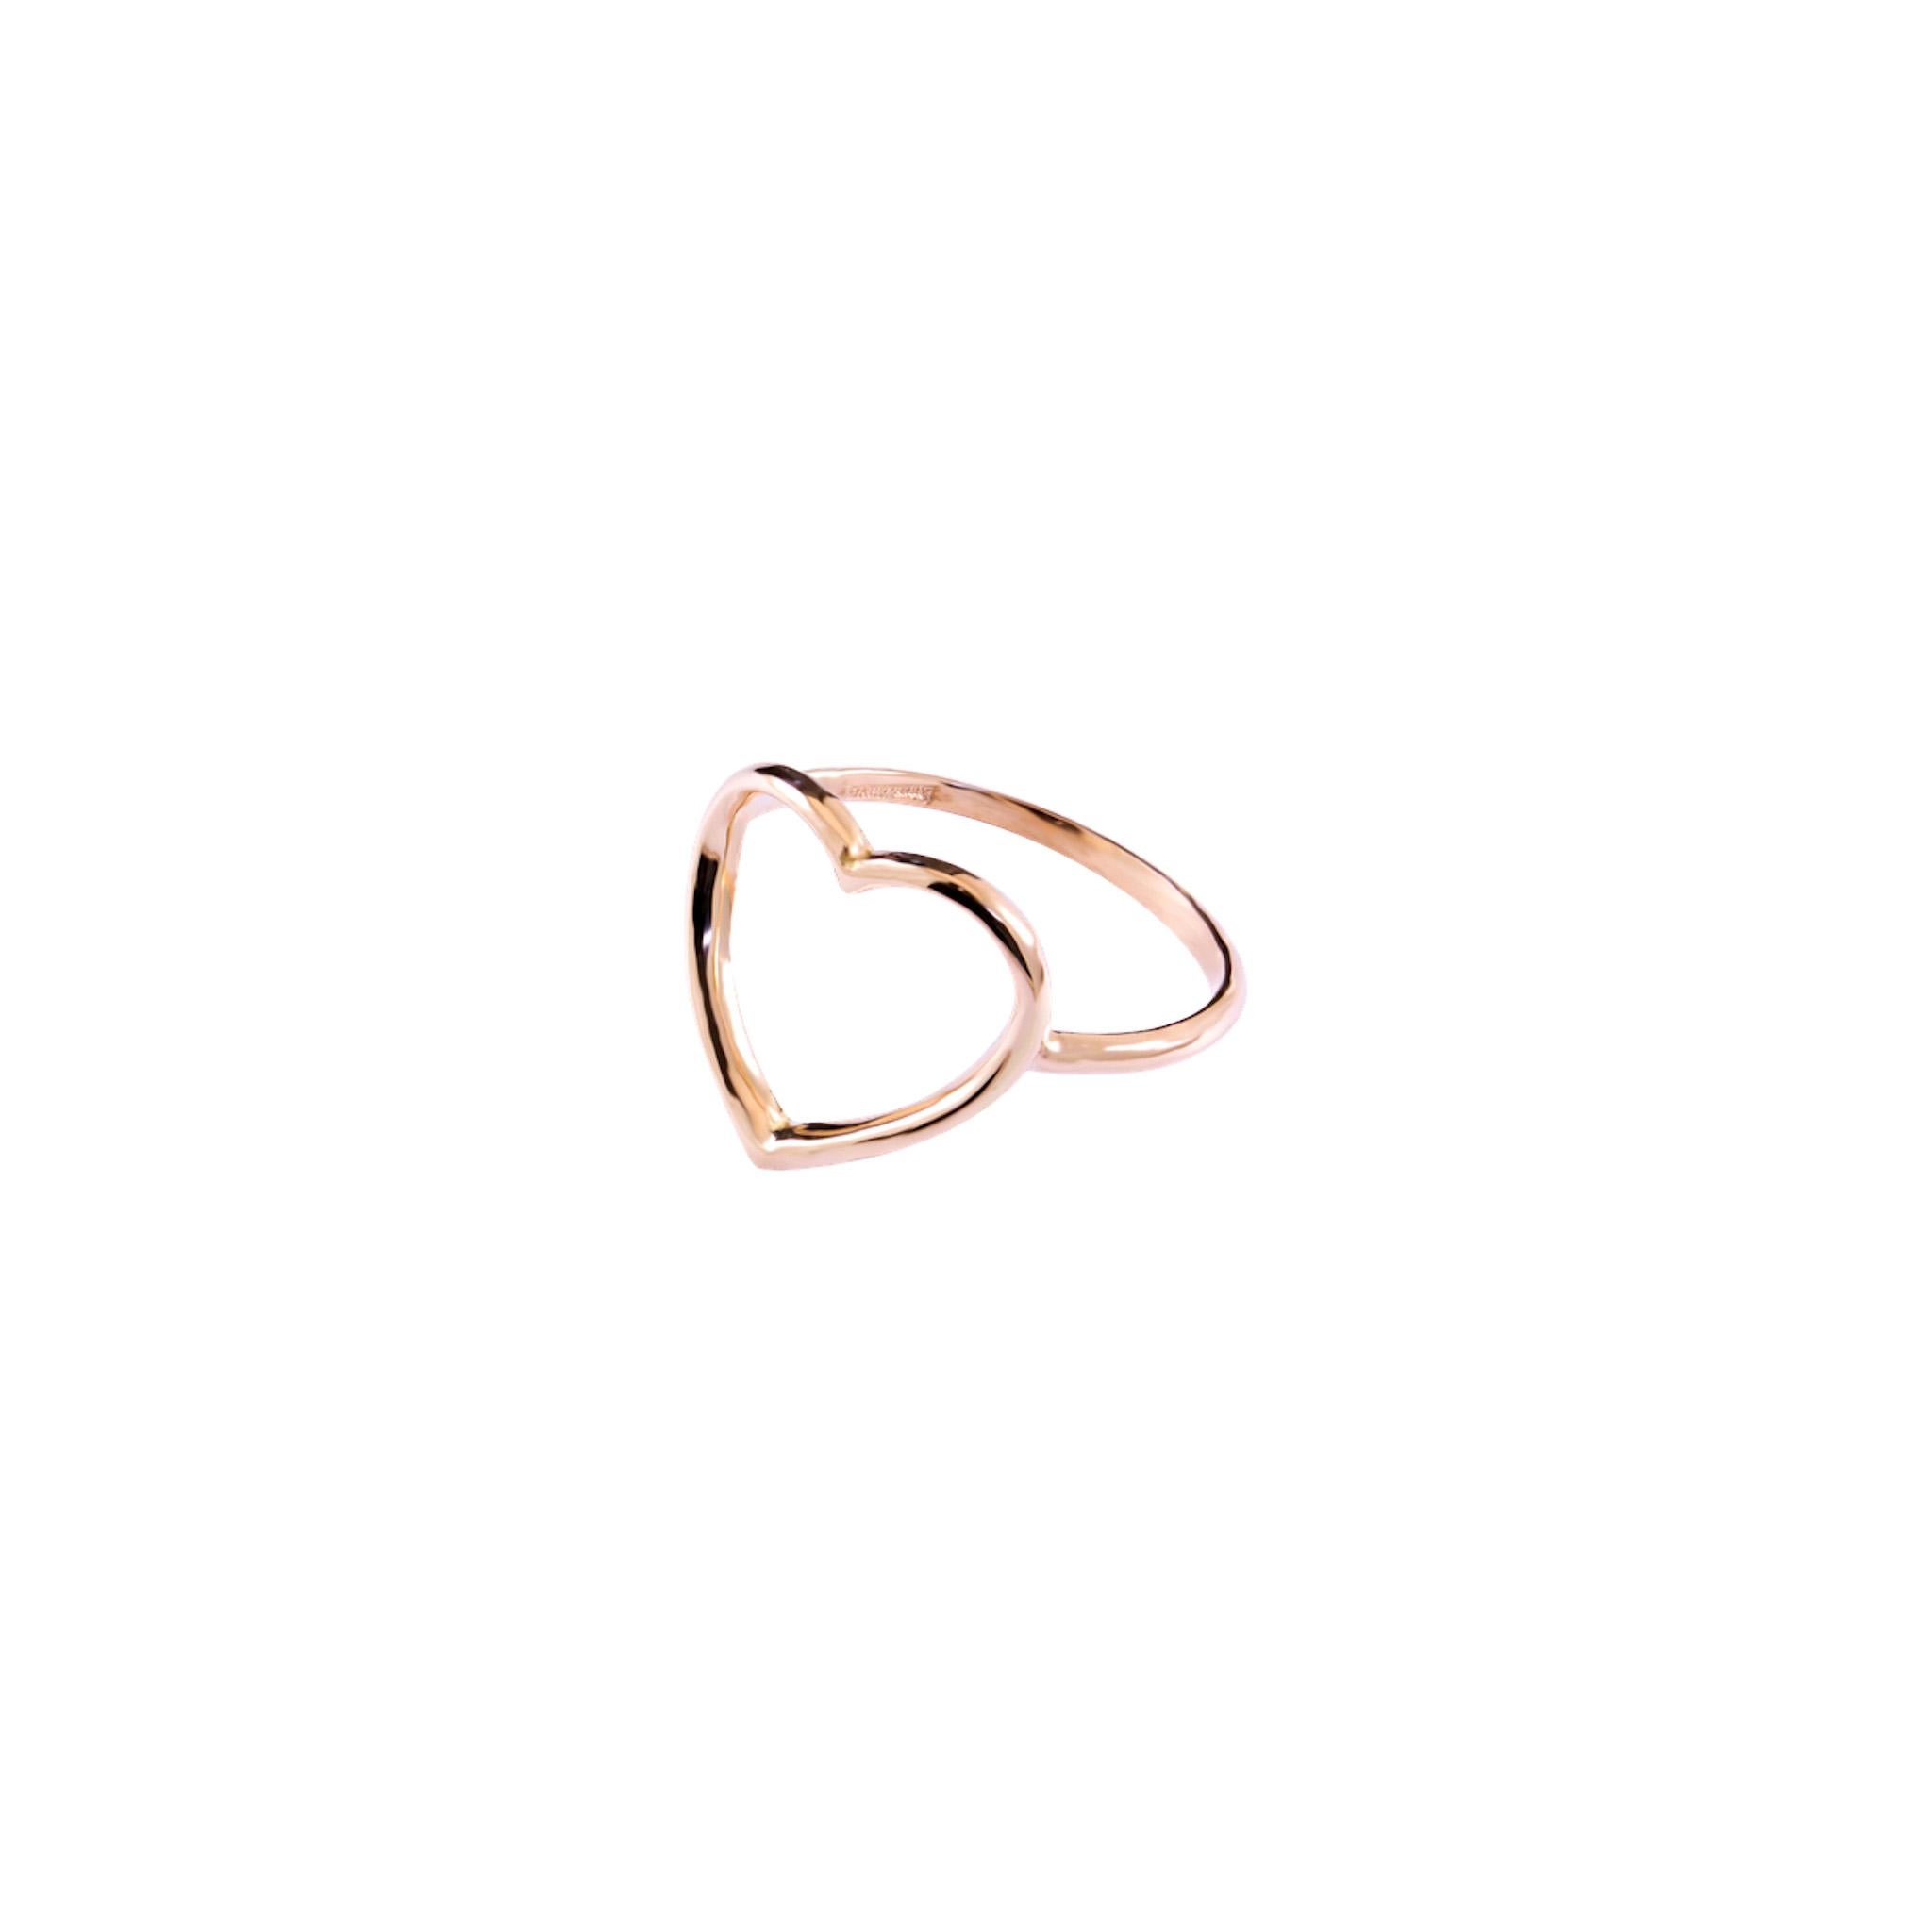 A beautiful 18k Yellow Gold Ring that has been handmade in our 150 year old workshop. This piece will be made to order and we are able to create it in 18k Yellow Gold, Rose Gold or White Gold. We are also able to set an accent stone in the piece,